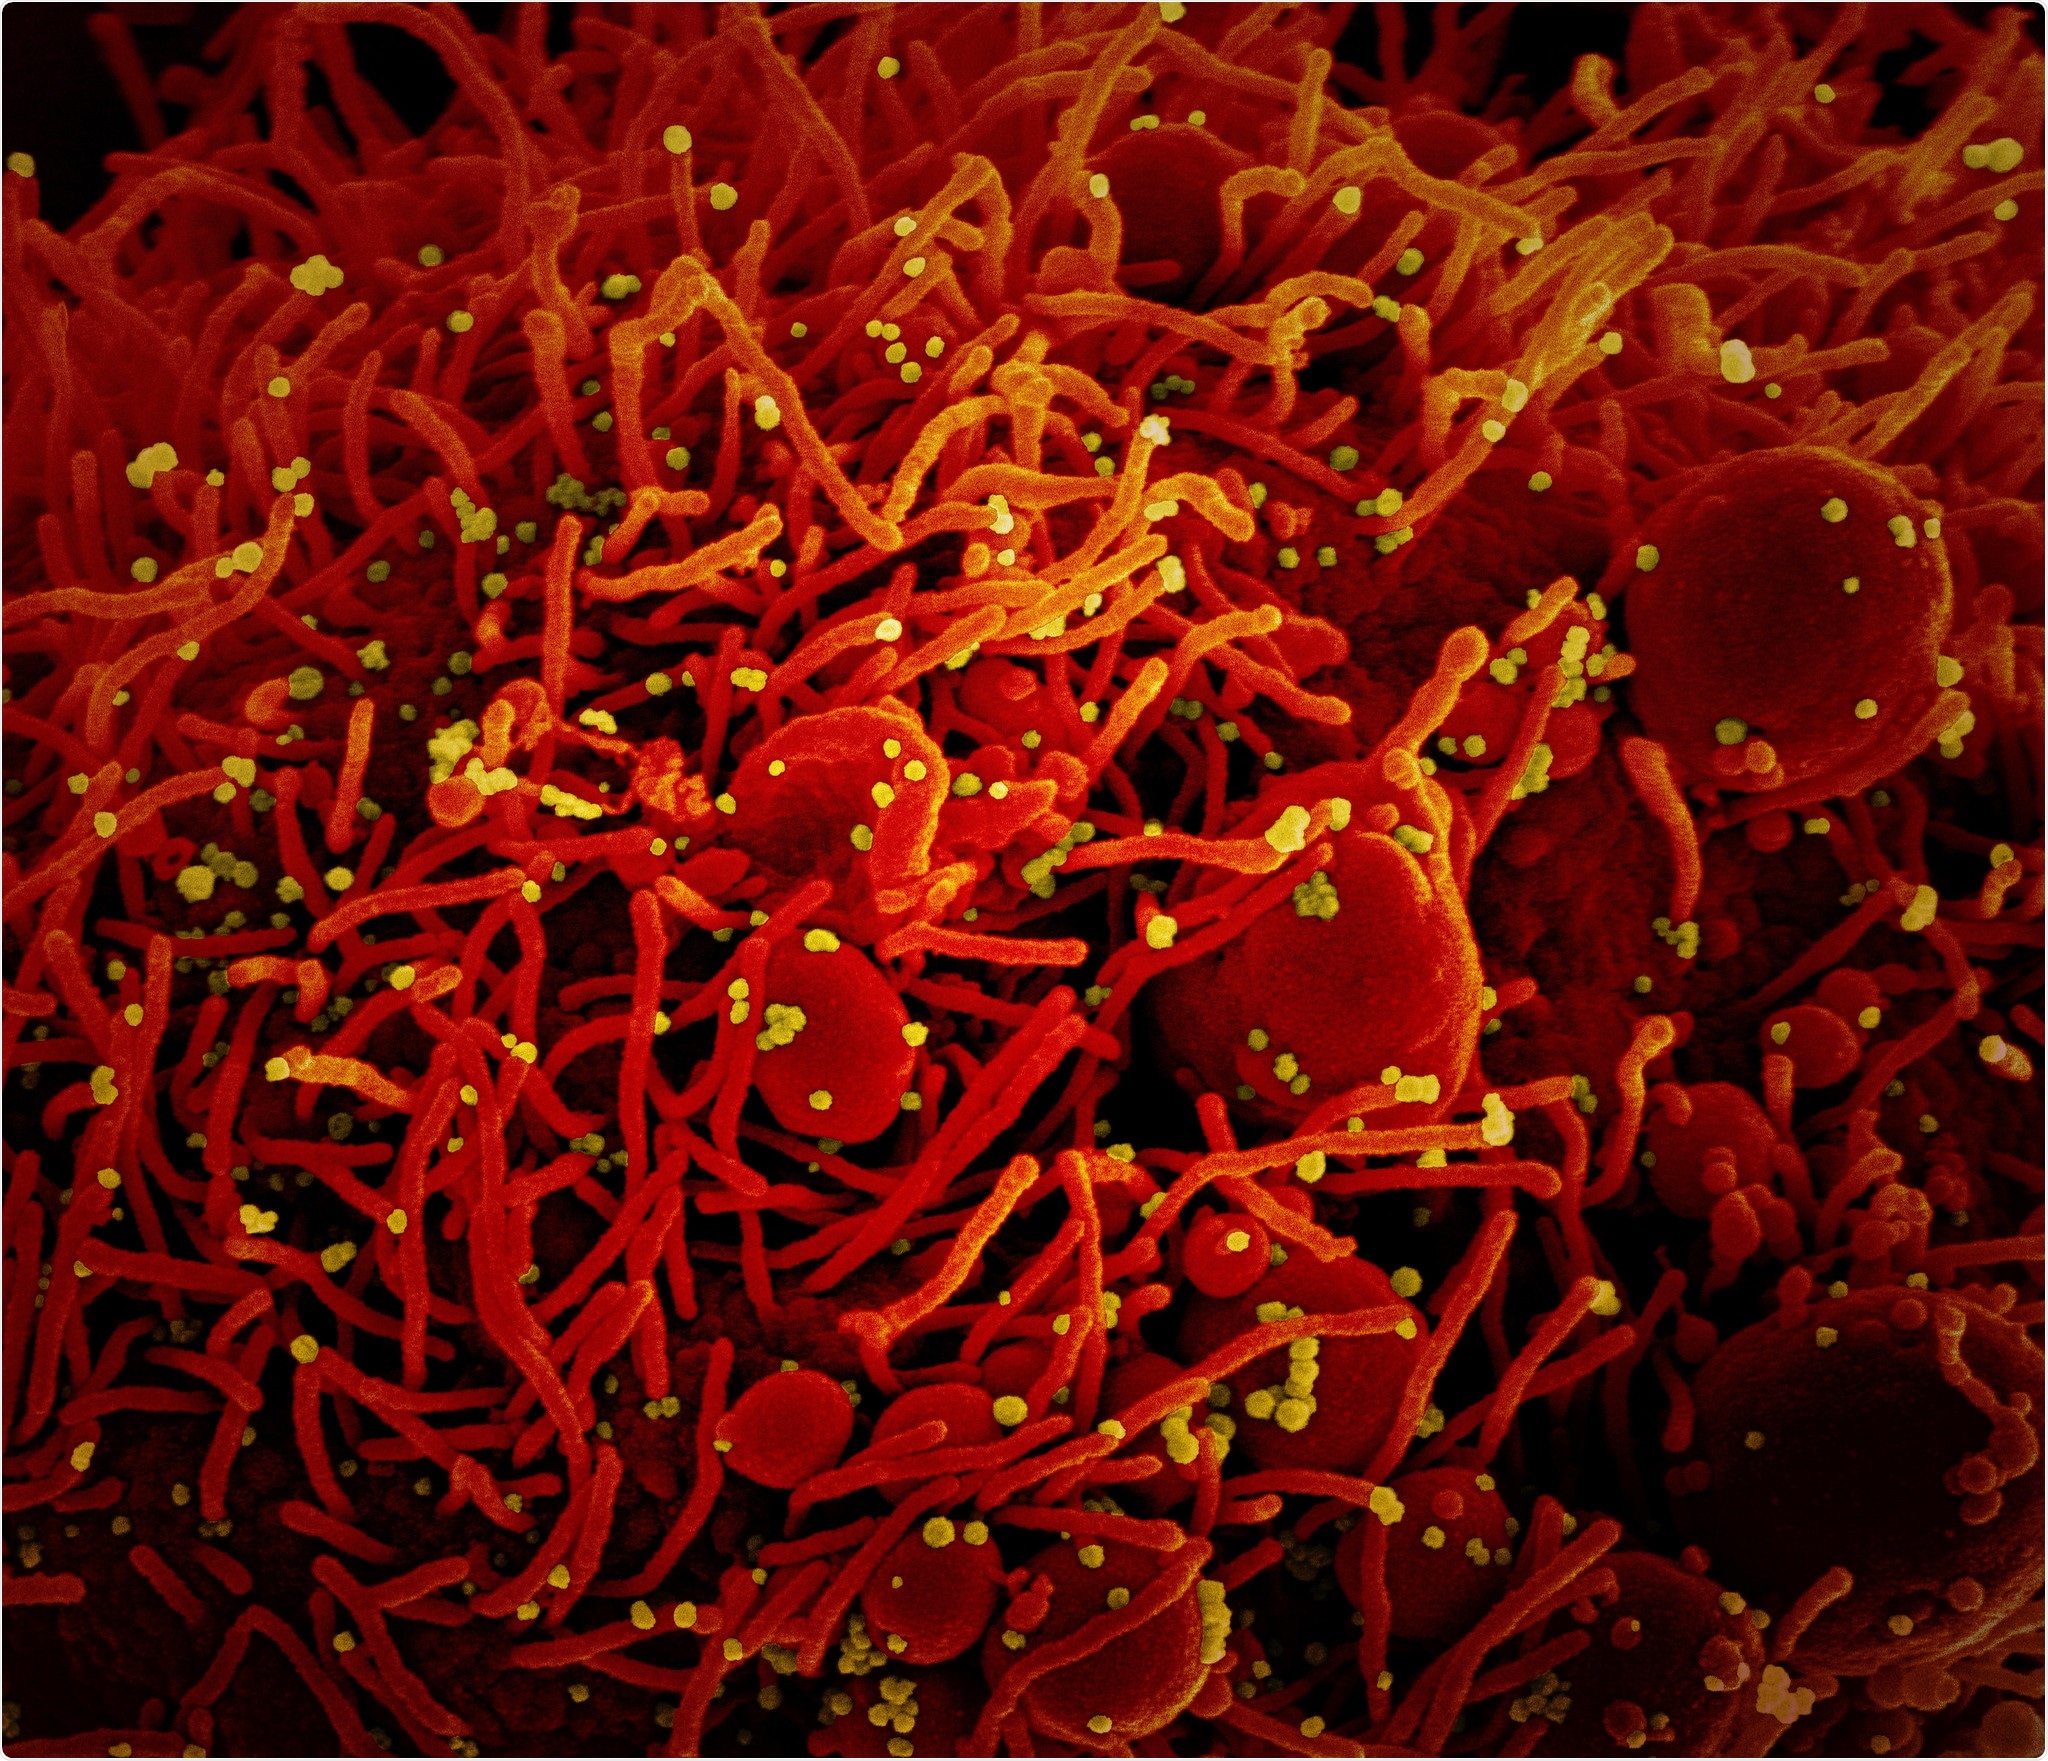 olorized scanning electron micrograph of an apoptotic cell (red) infected with SARS-COV-2 virus particles (yellow), isolated from a patient sample. Image captured at the NIAID Integrated Research Facility (IRF) in Fort Detrick, Maryland. Credit: NIAID